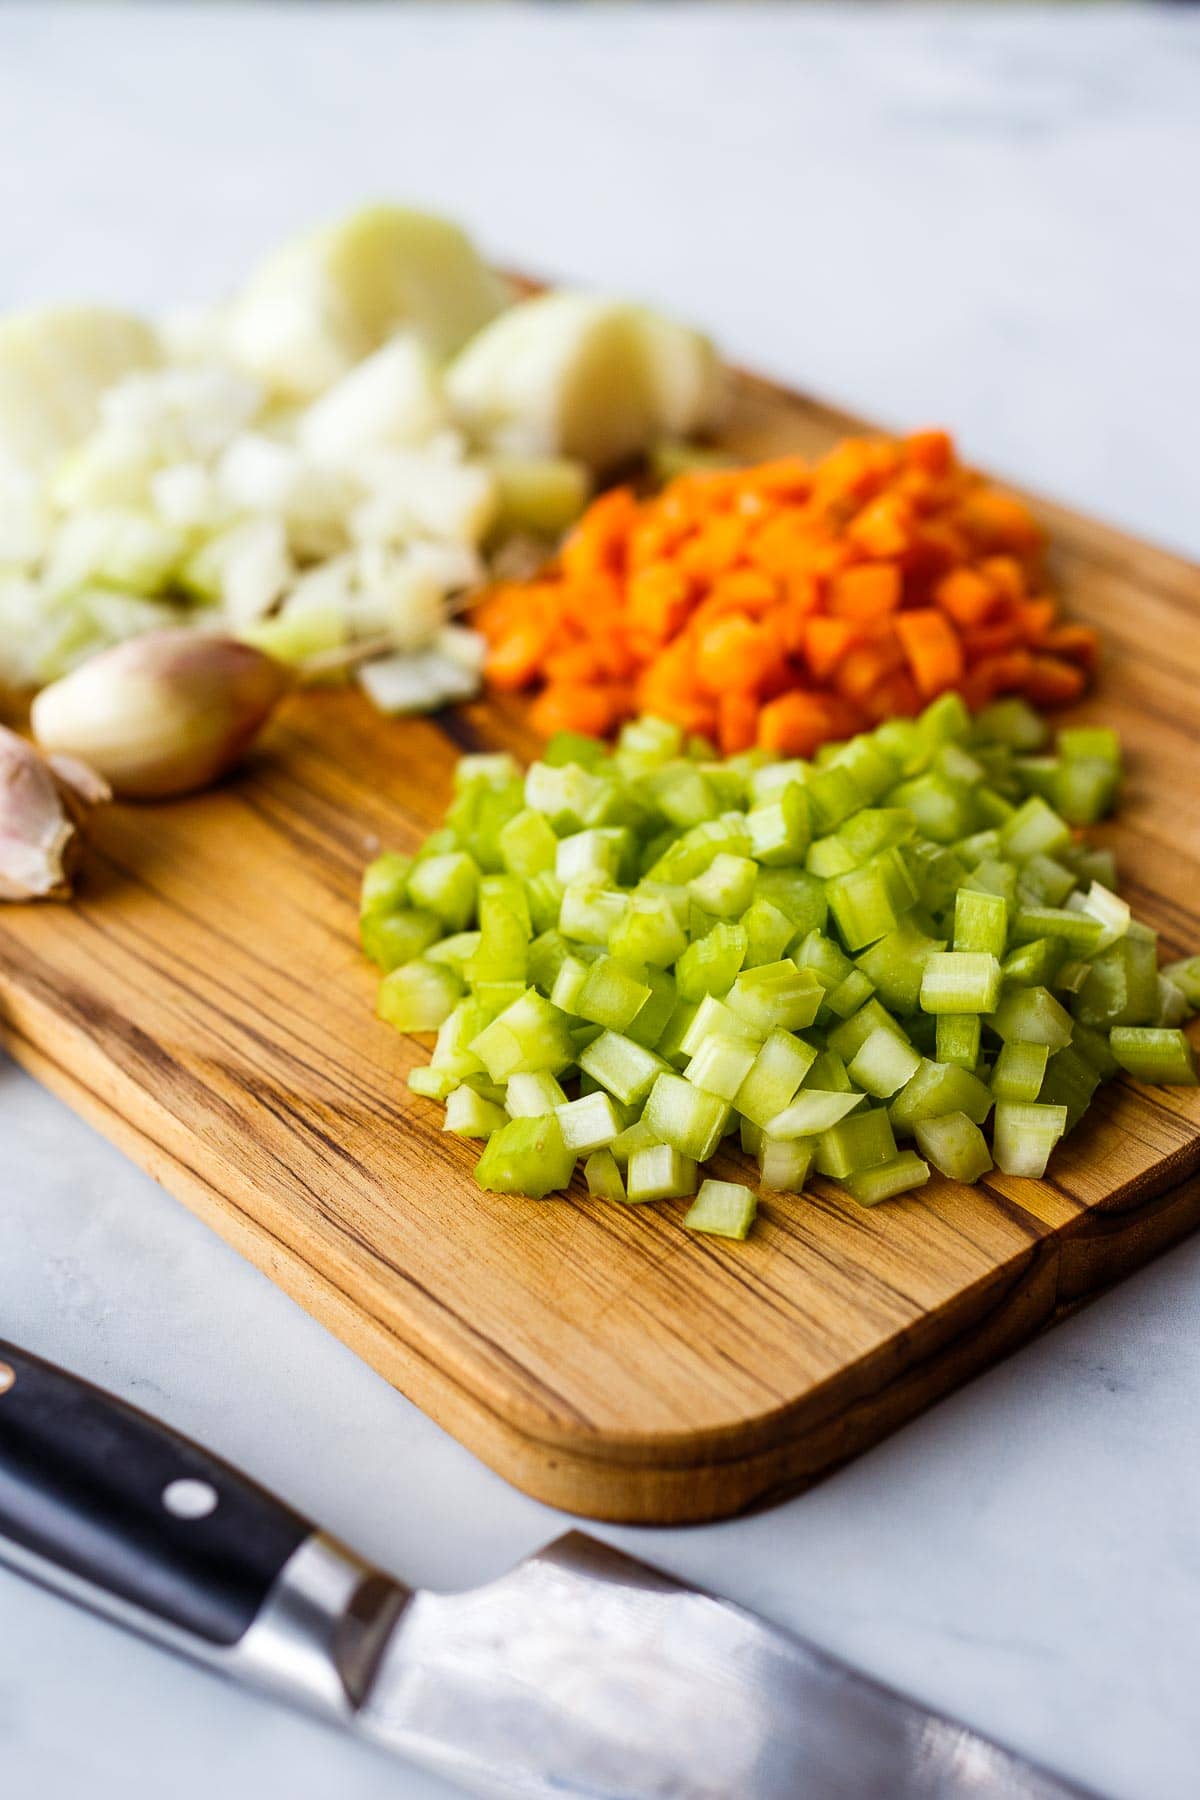 Chopped onion, carrot and celery.